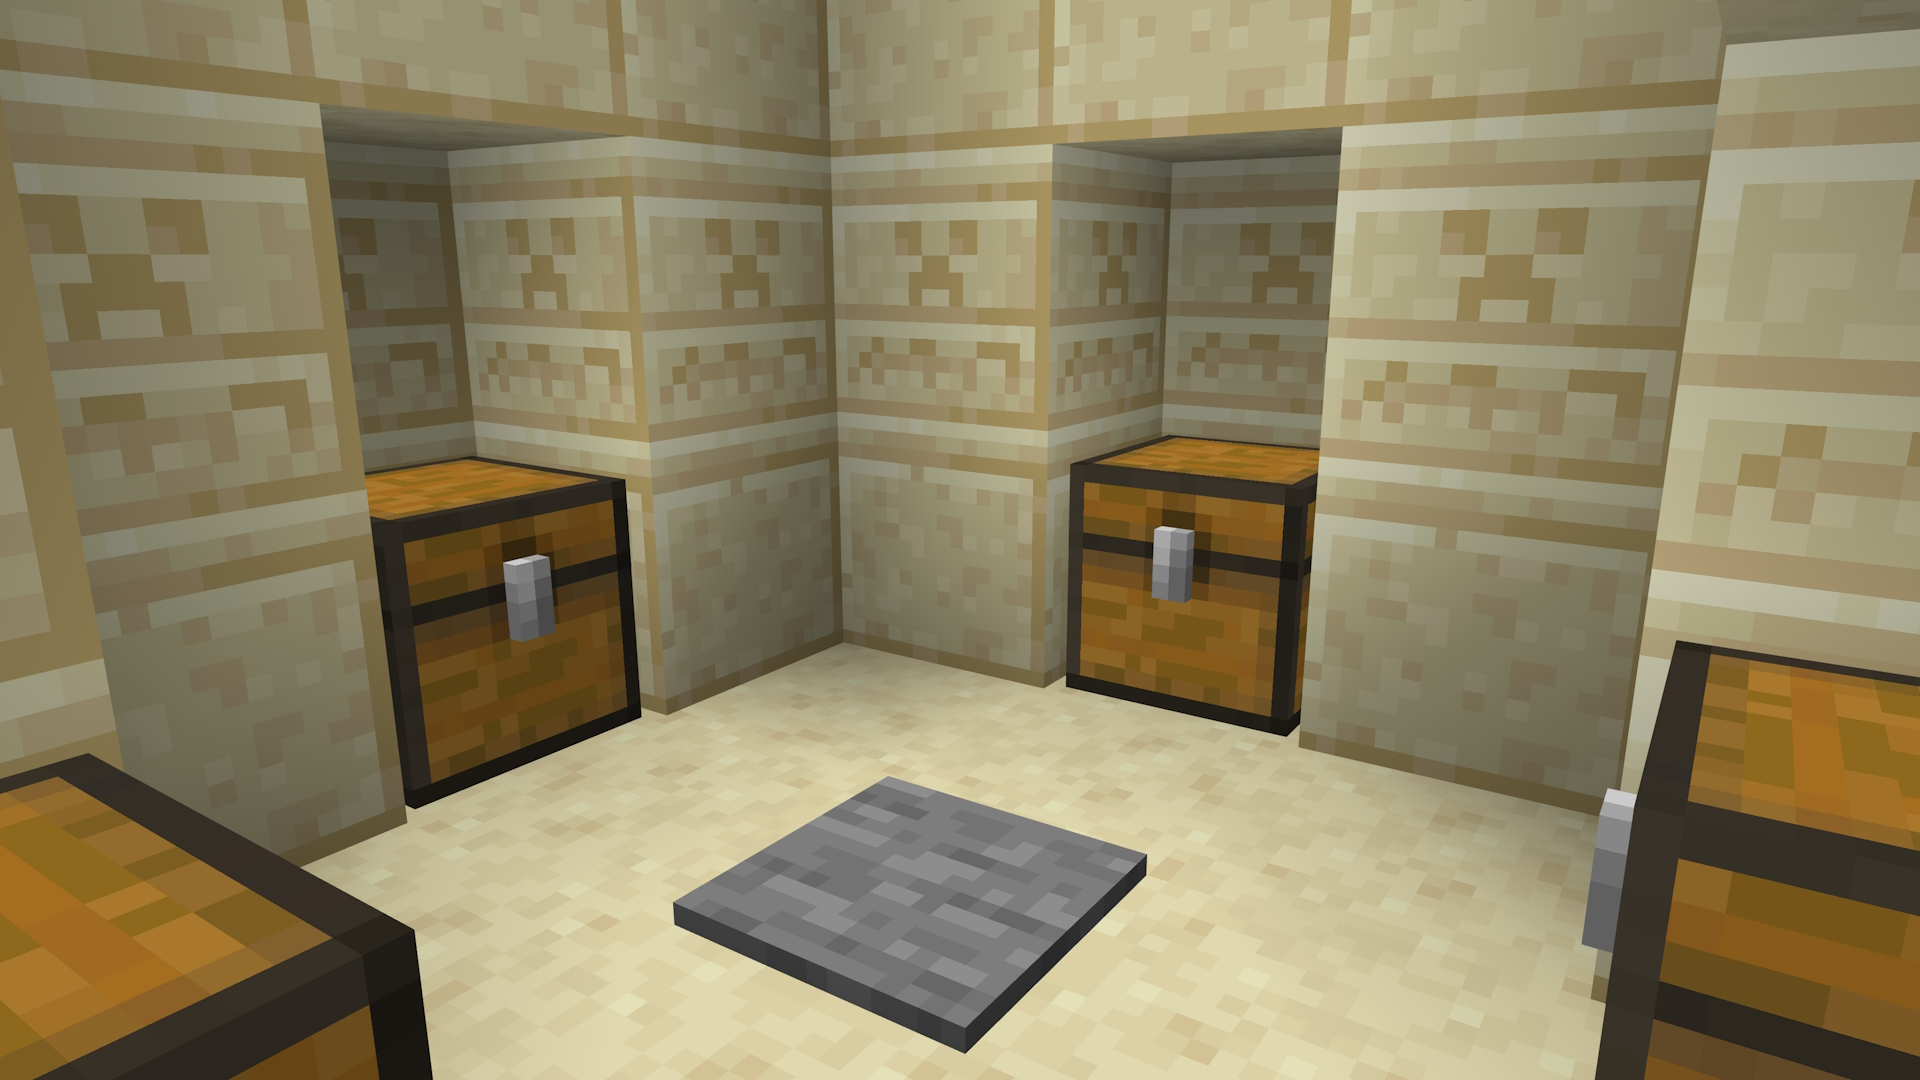 A desert pyramid in Minecraft. Four chests in a small room with a pressure plate in the centre.